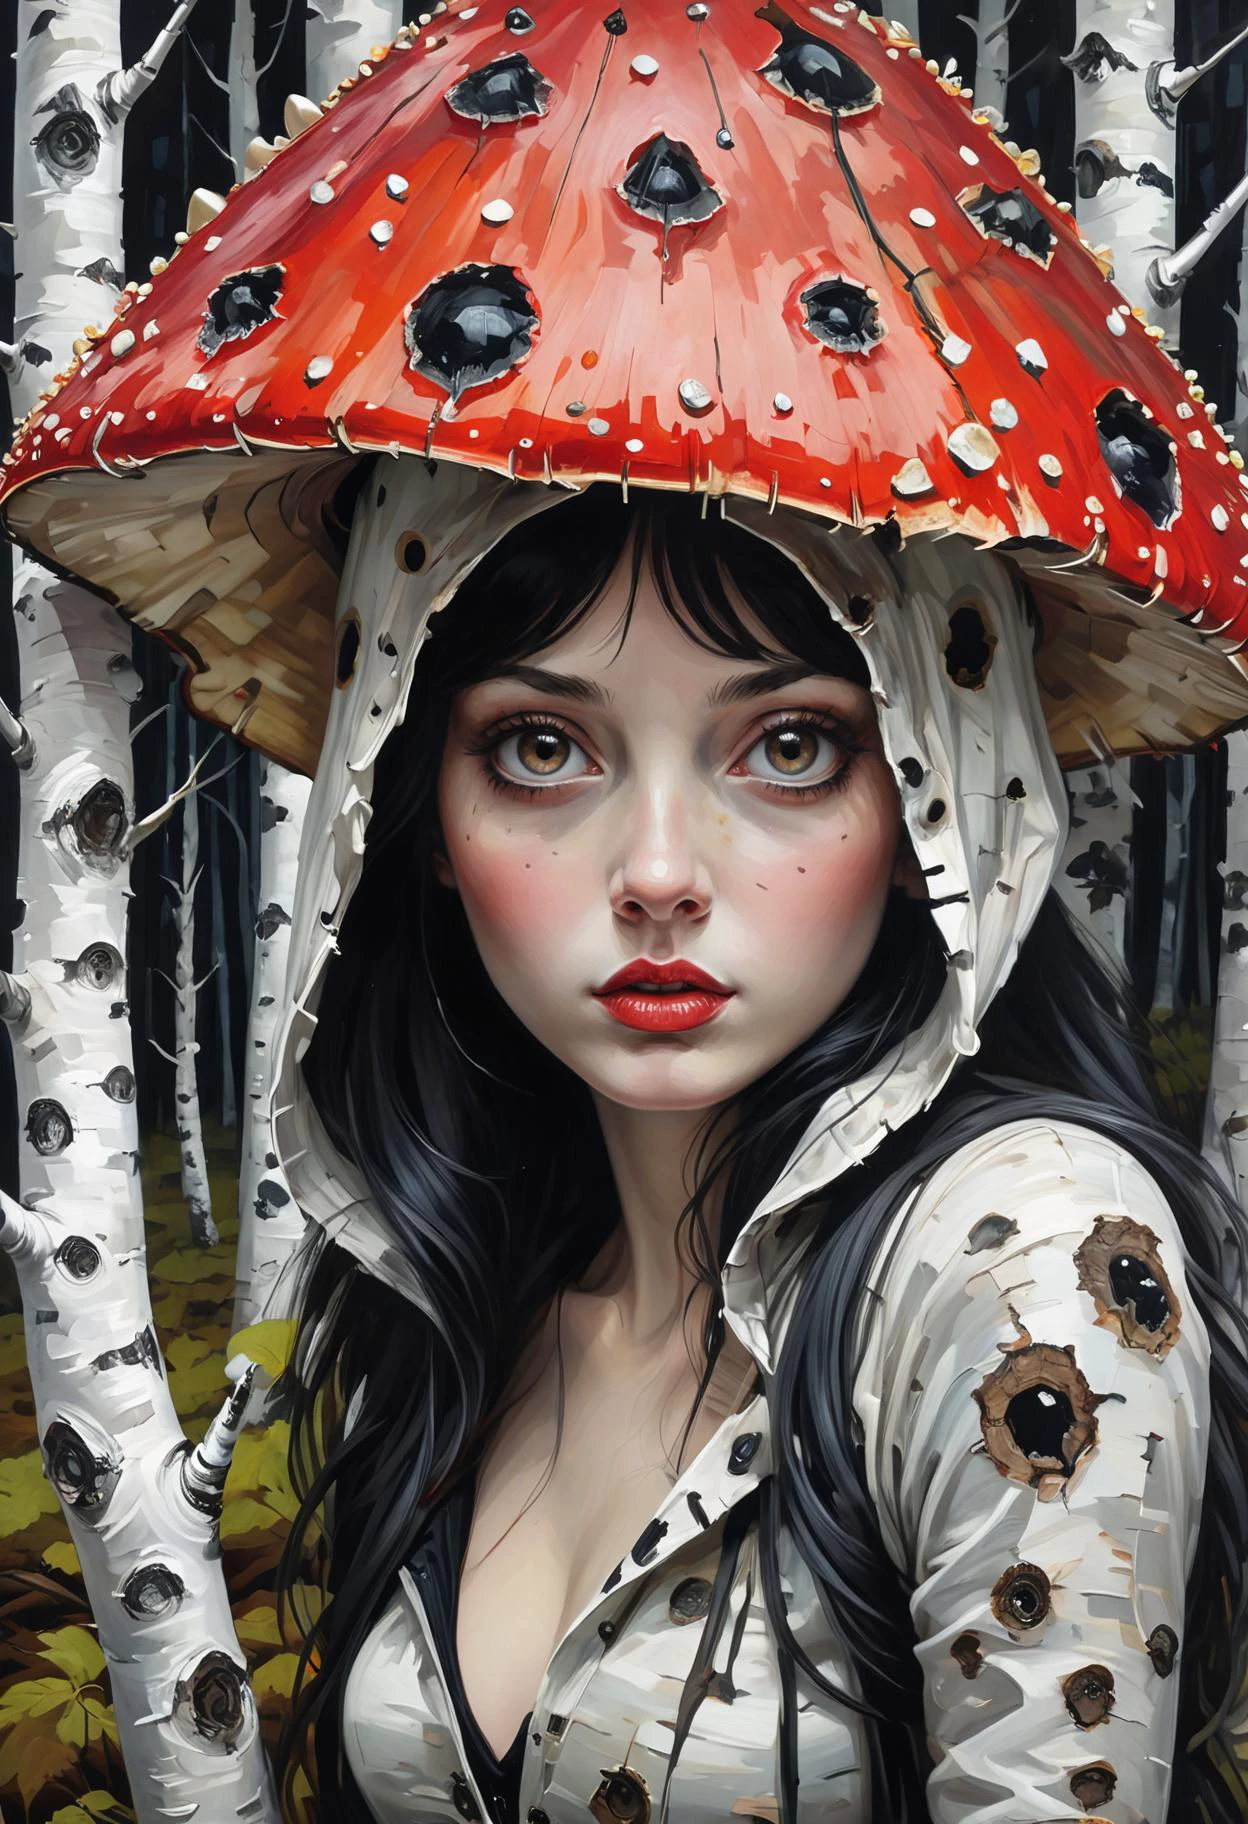 super closeup portrait,majestic animal, Create an evocative scene in the style of Jim Salvati with a photograph capturing the essence of a fly agaric figure in a haunting birch forest. The figure, shrouded in mystery, attempts to conceal itself behind a birch tree, casting furtive glances towards the viewer. Emphasize the stark contrast of the black-and-white birch bark, infusing the image with a sense of darkness, enchantment, and post-apocalyptic allure.
